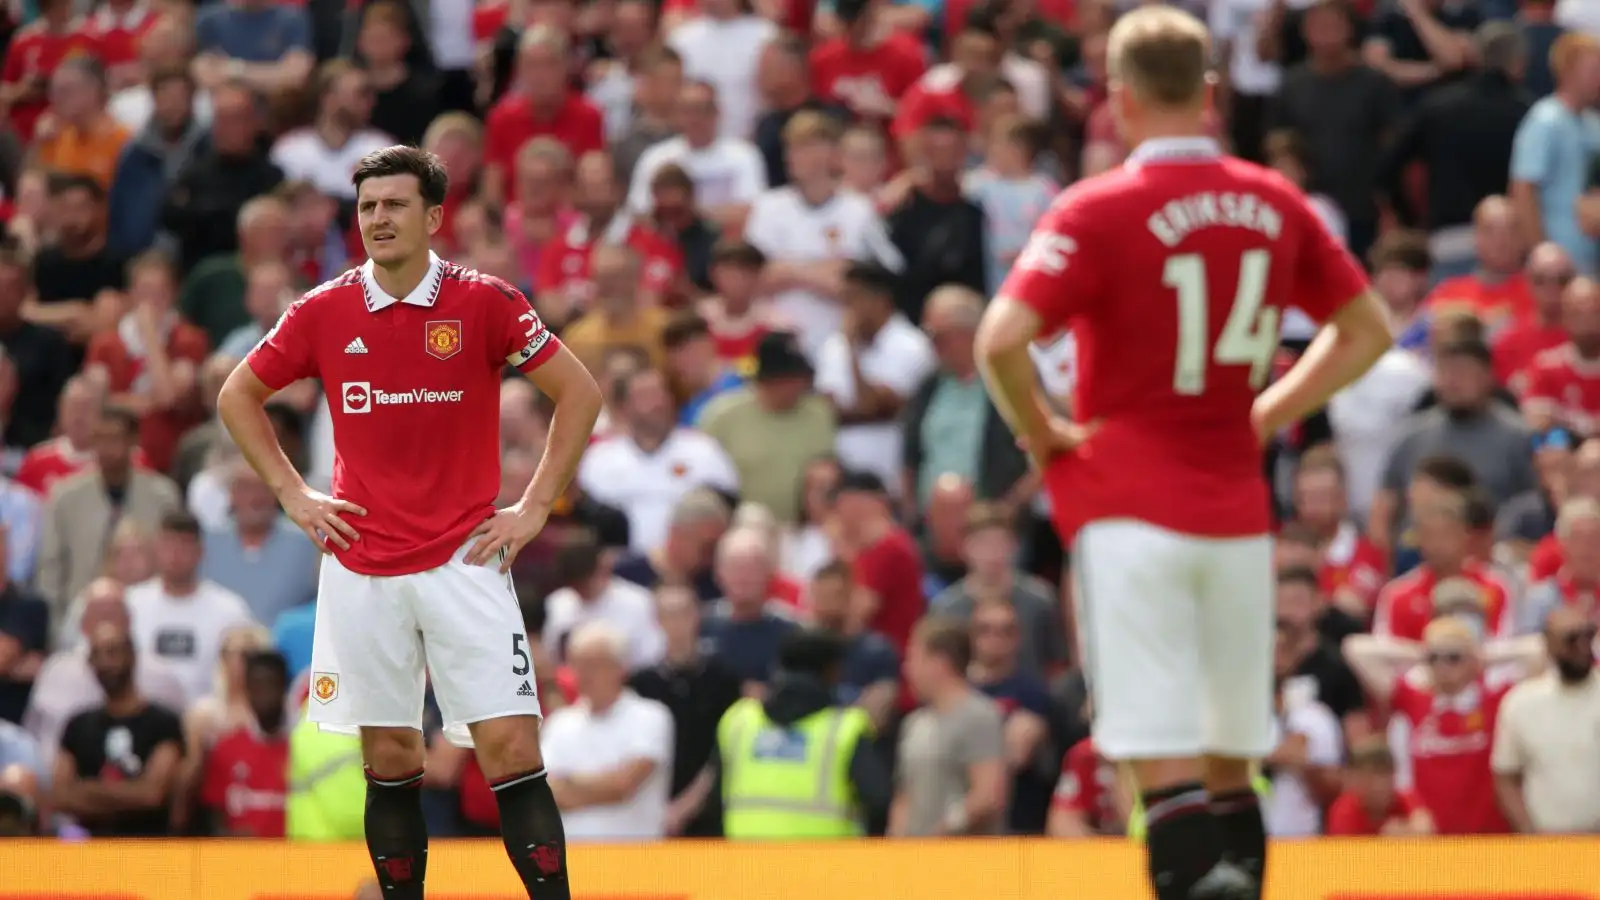 Man Utd defender Harry Maguire puts his hands on his hips